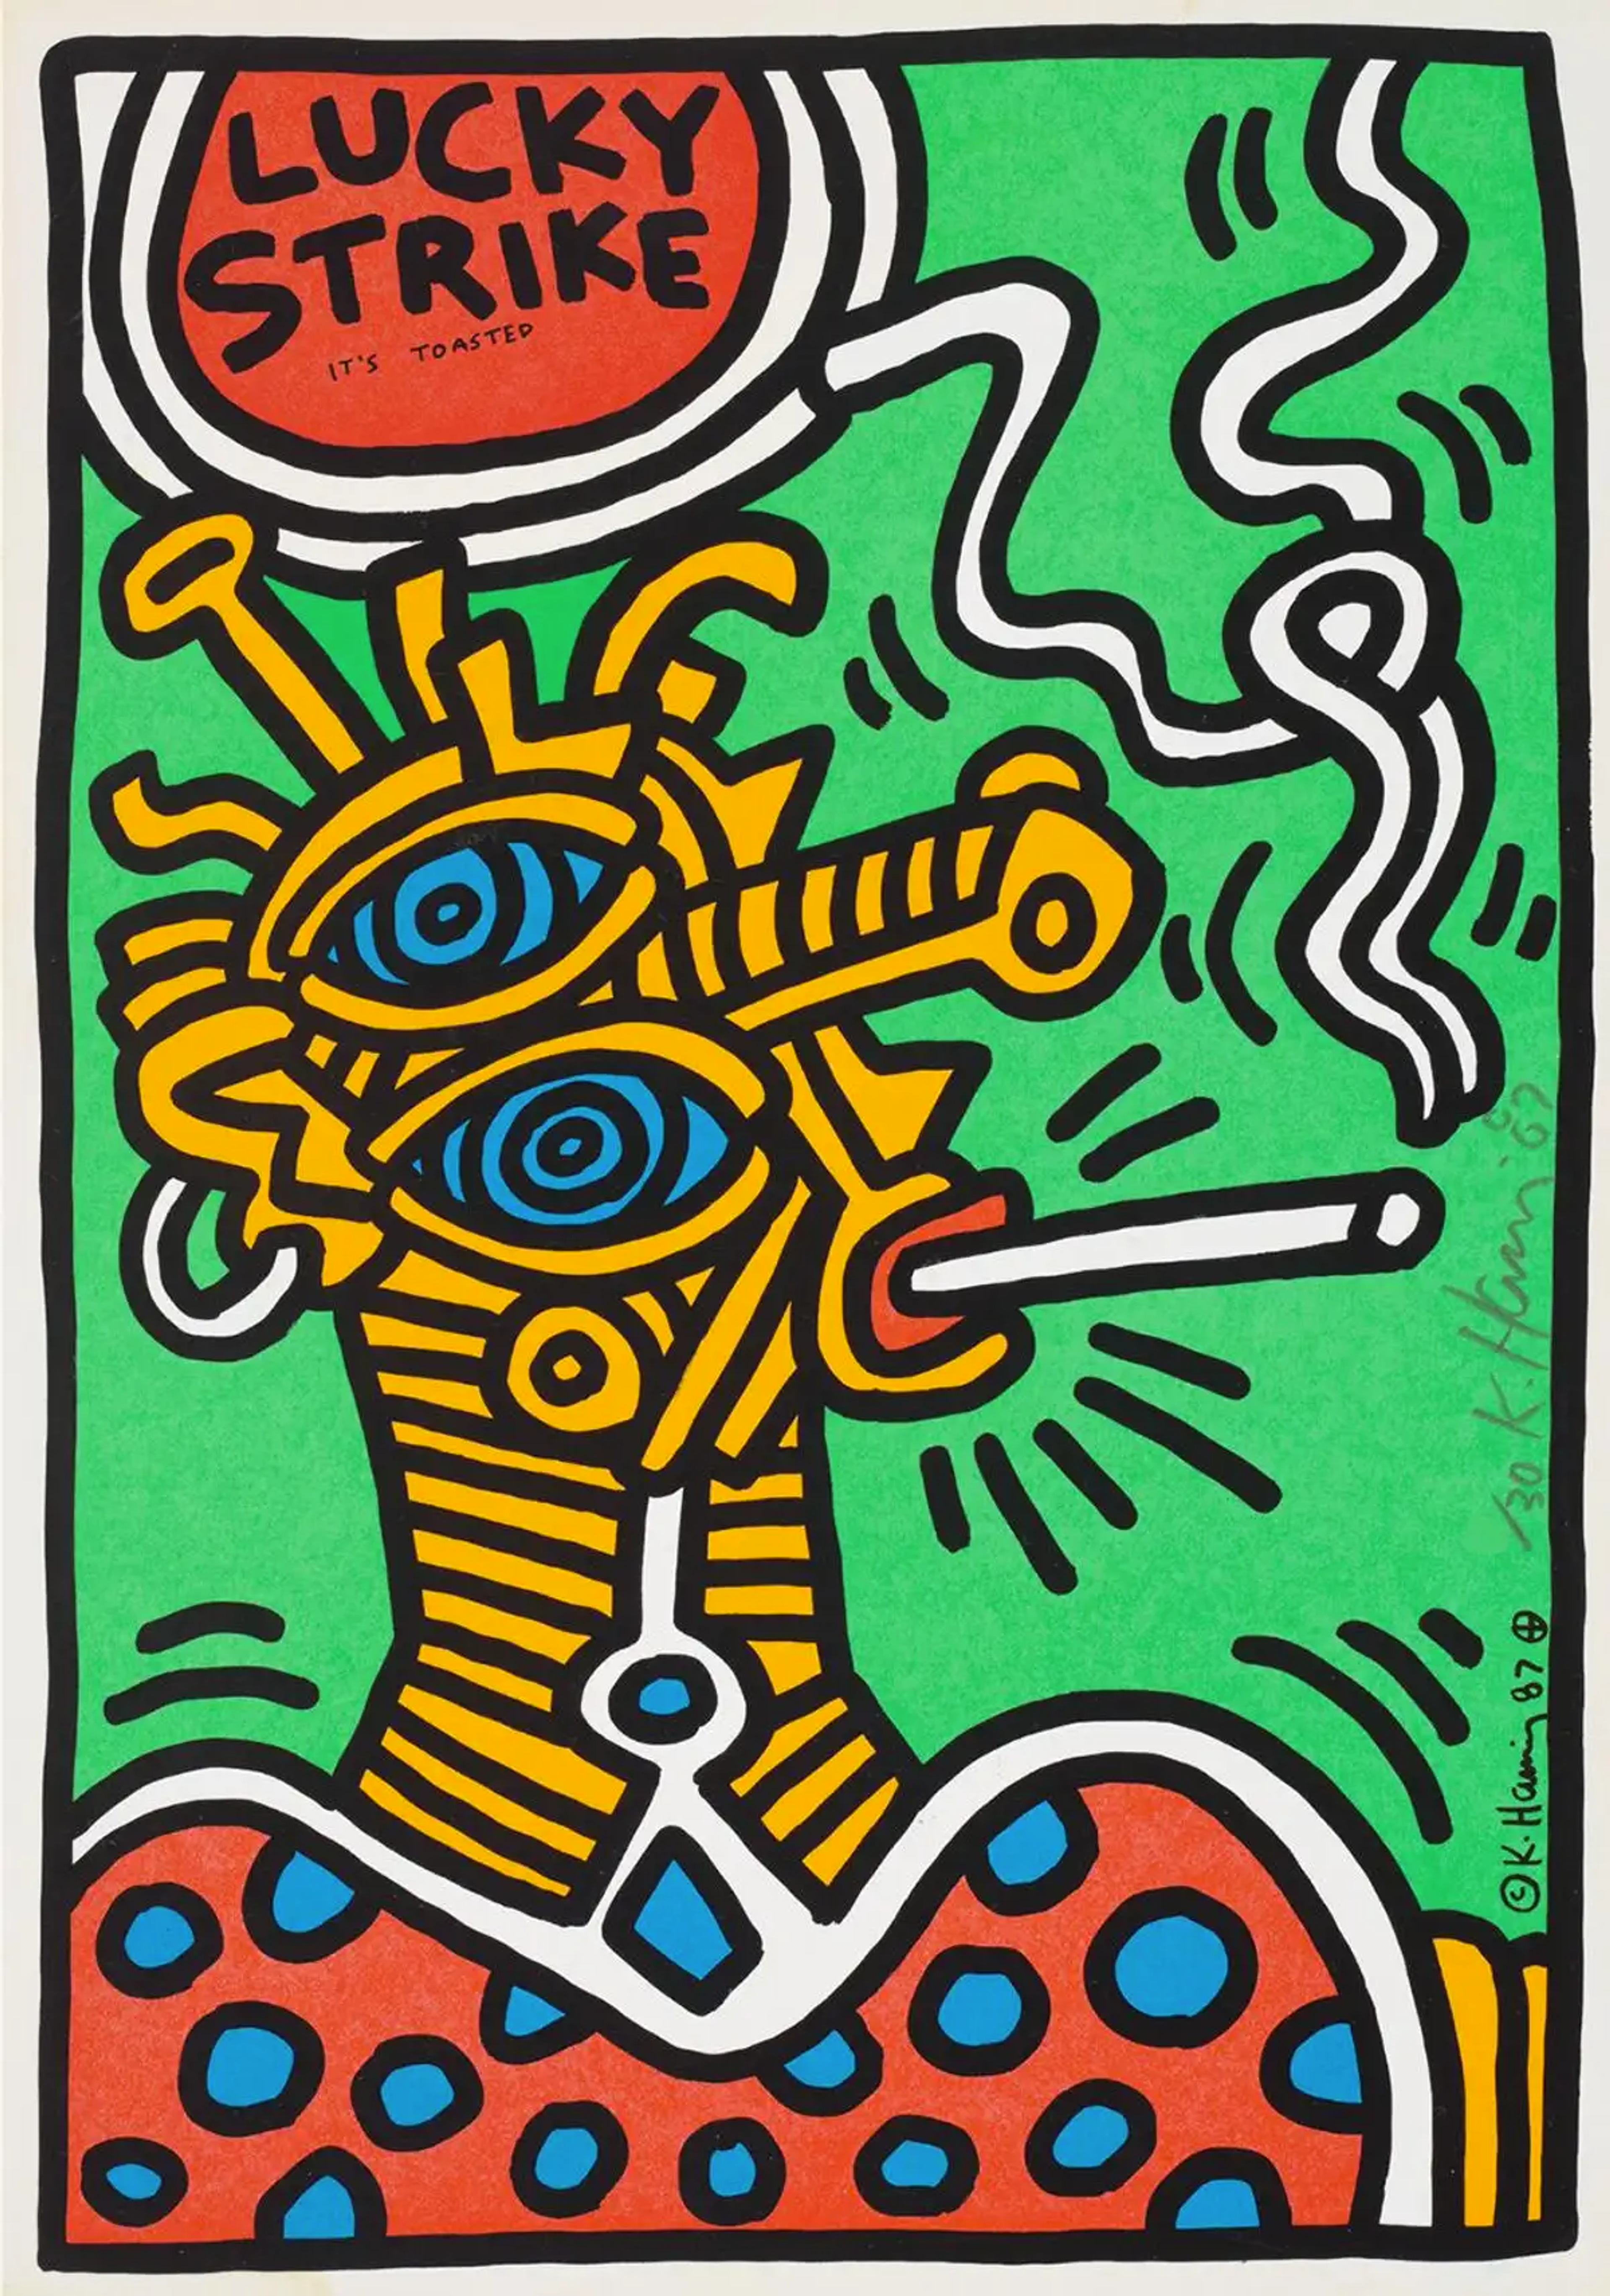 An abstract-like figure, depicted in bold lines and shown in yellow, is seen smoking a cigarette against a green background. The Lucky Strike logo is in the top right corner.